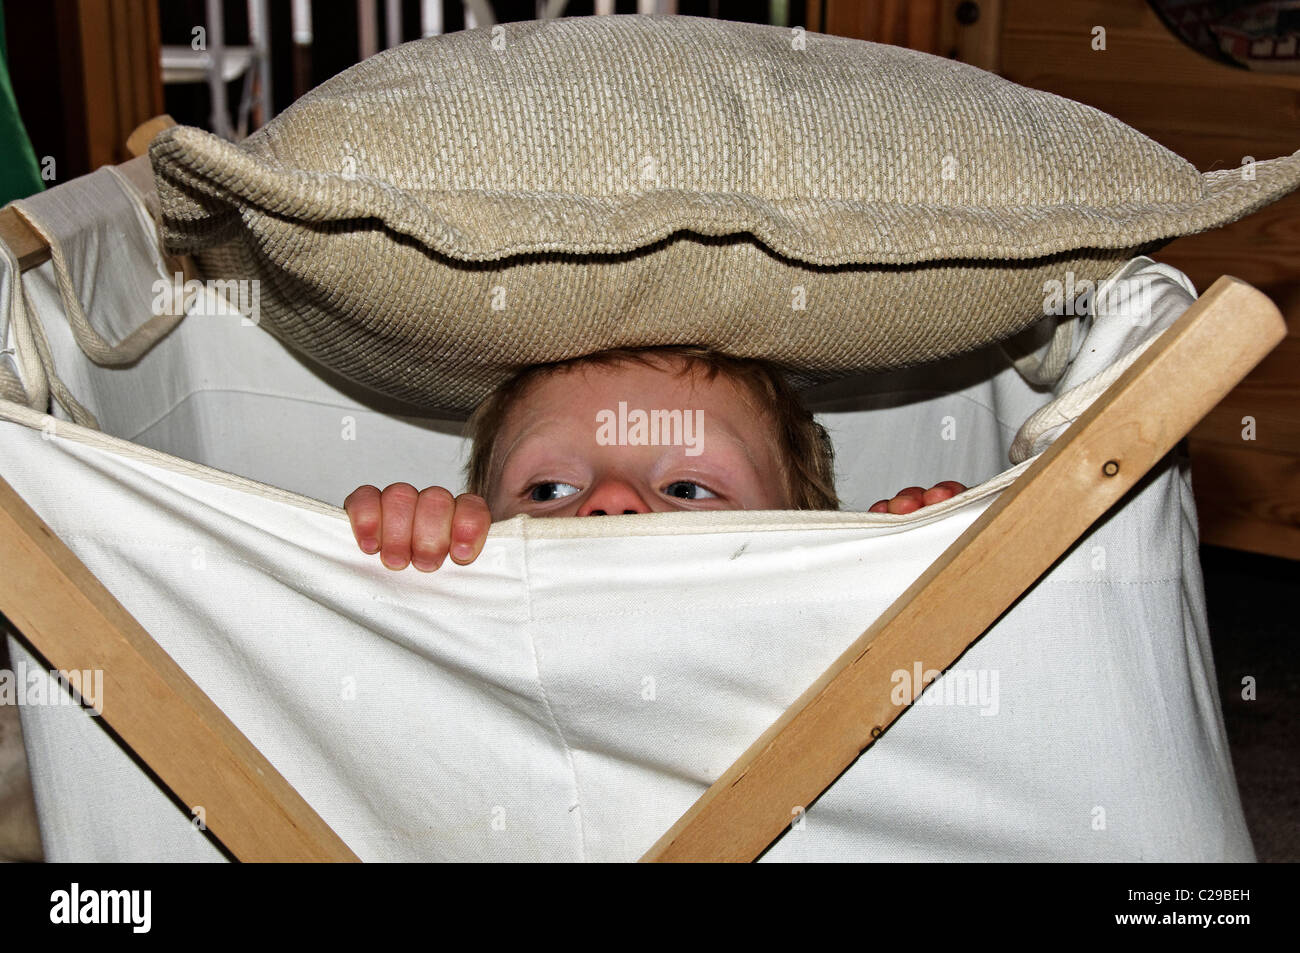 A young boy hiding in a laundry basket Stock Photo - Alamy